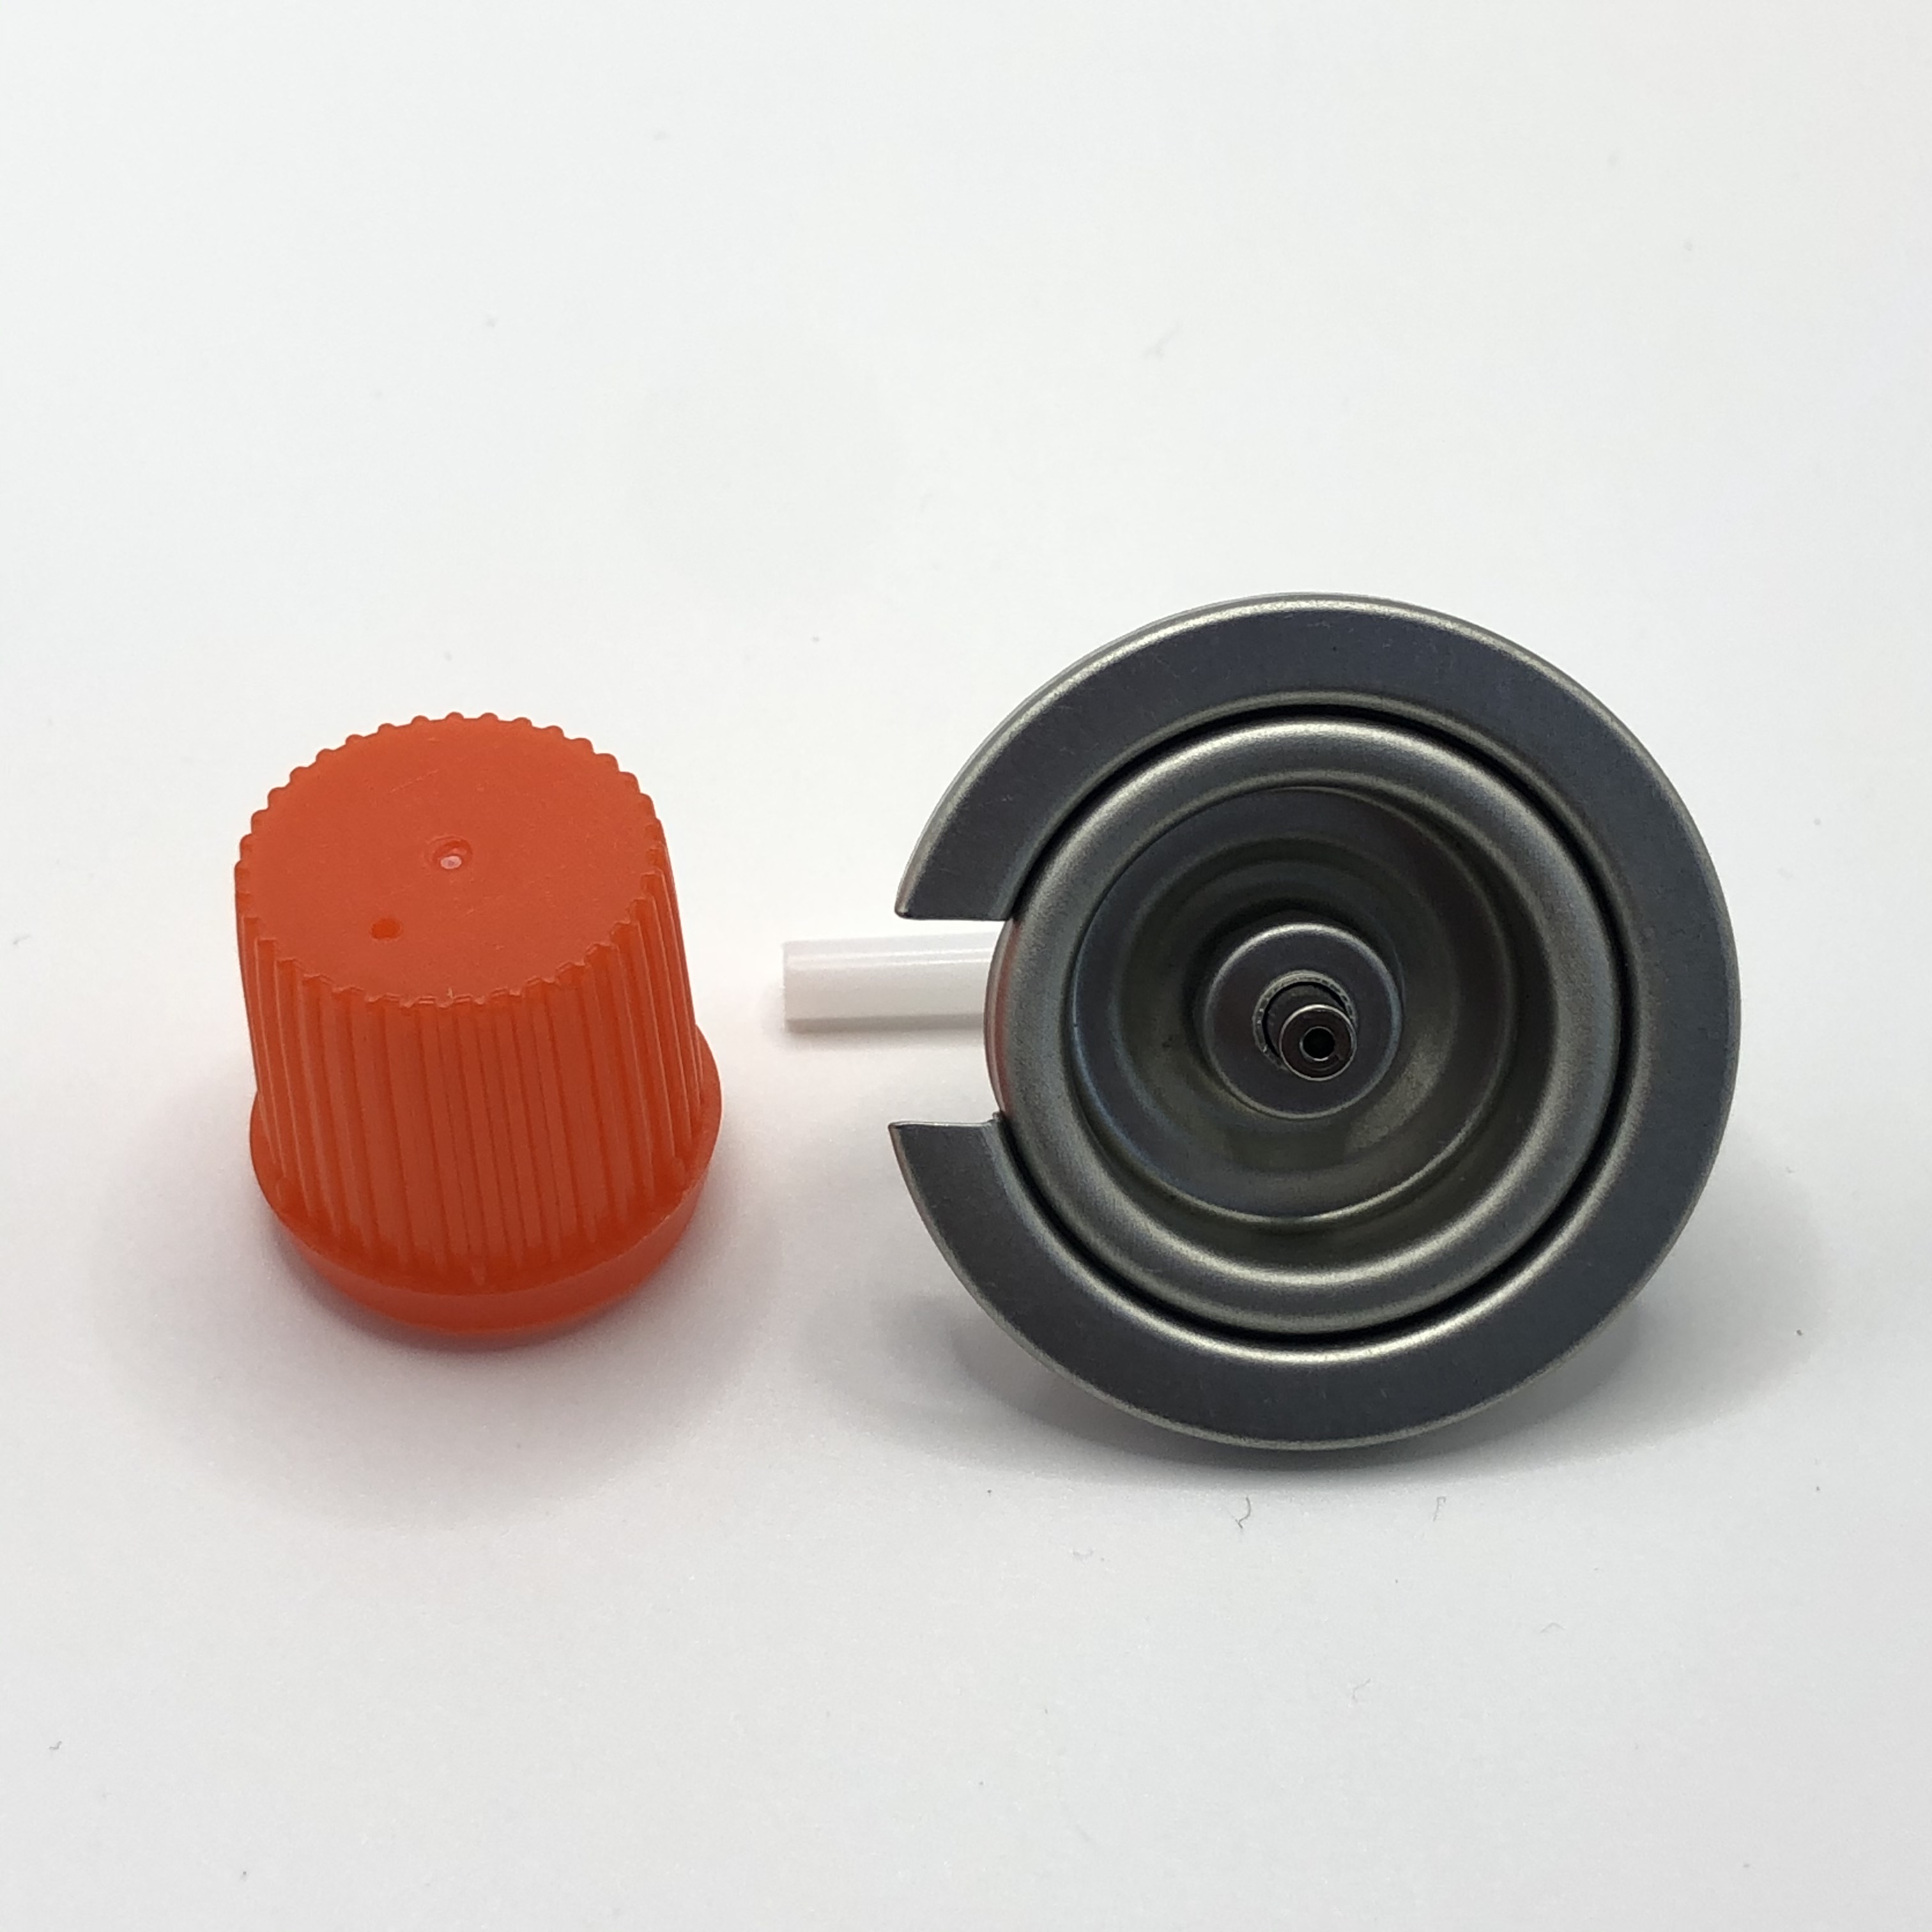 Manufacture 1 Inch Portable Gas Stove Valve with Red Caps